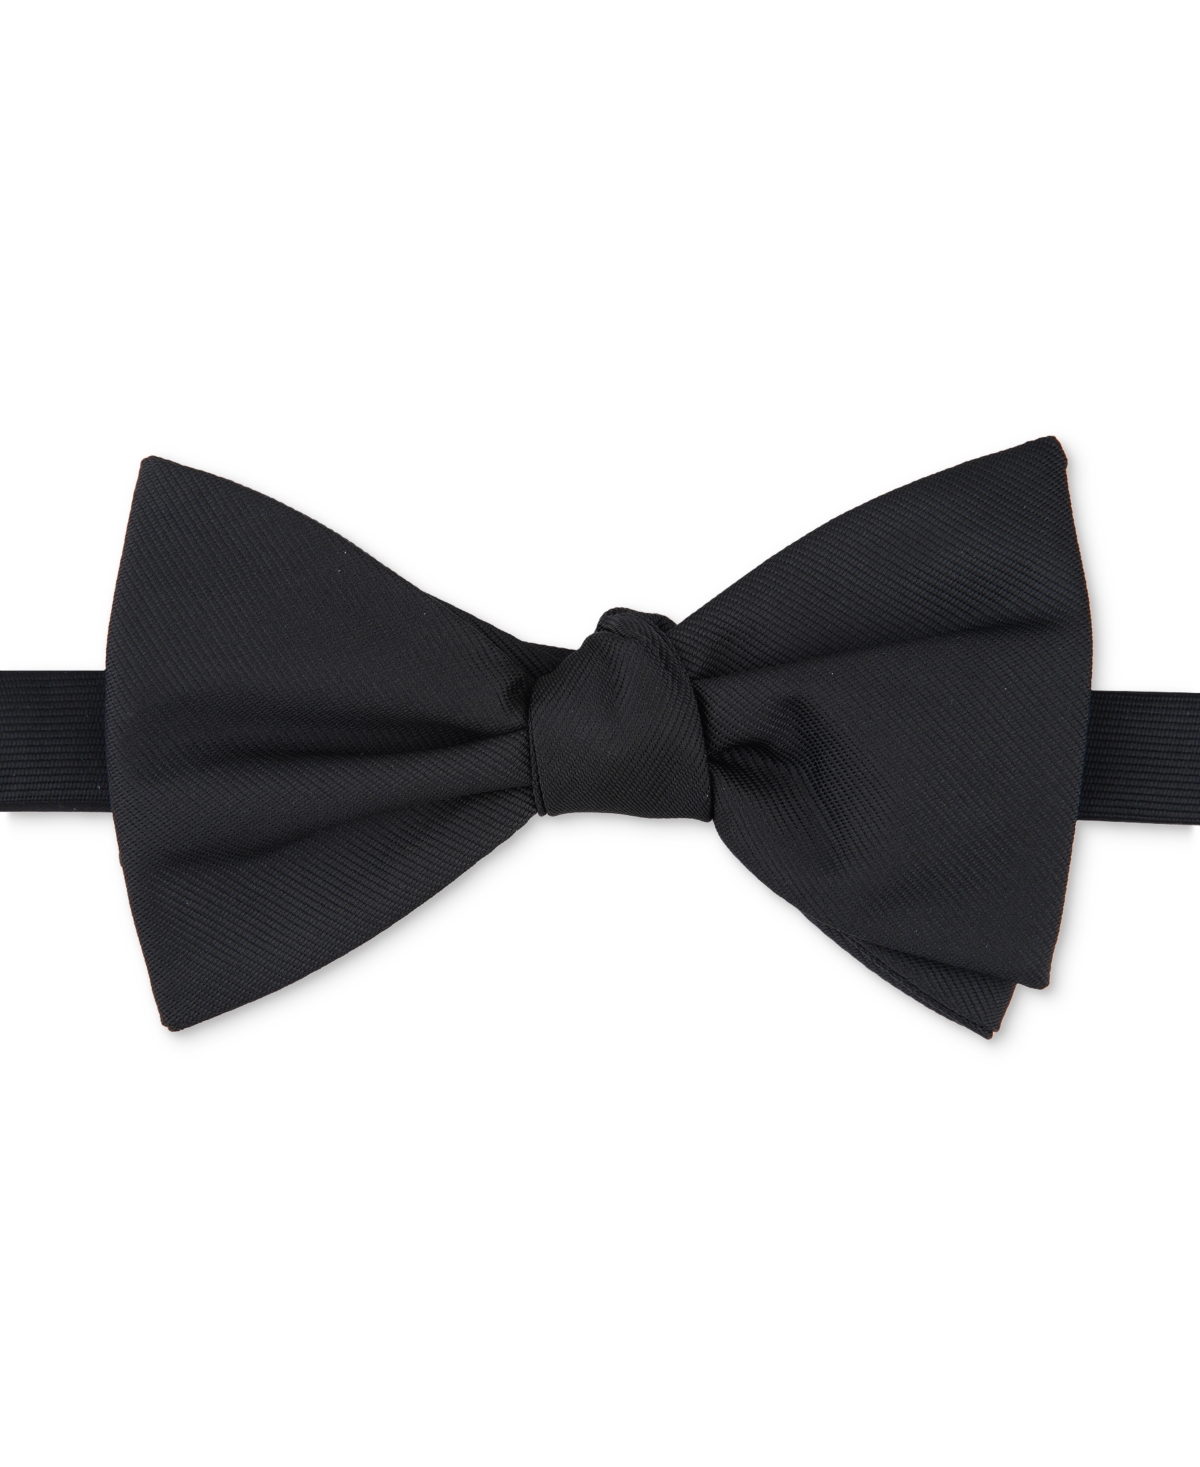 Men's Piercy Solid Black Bow Tie, Created for Macy's - Black